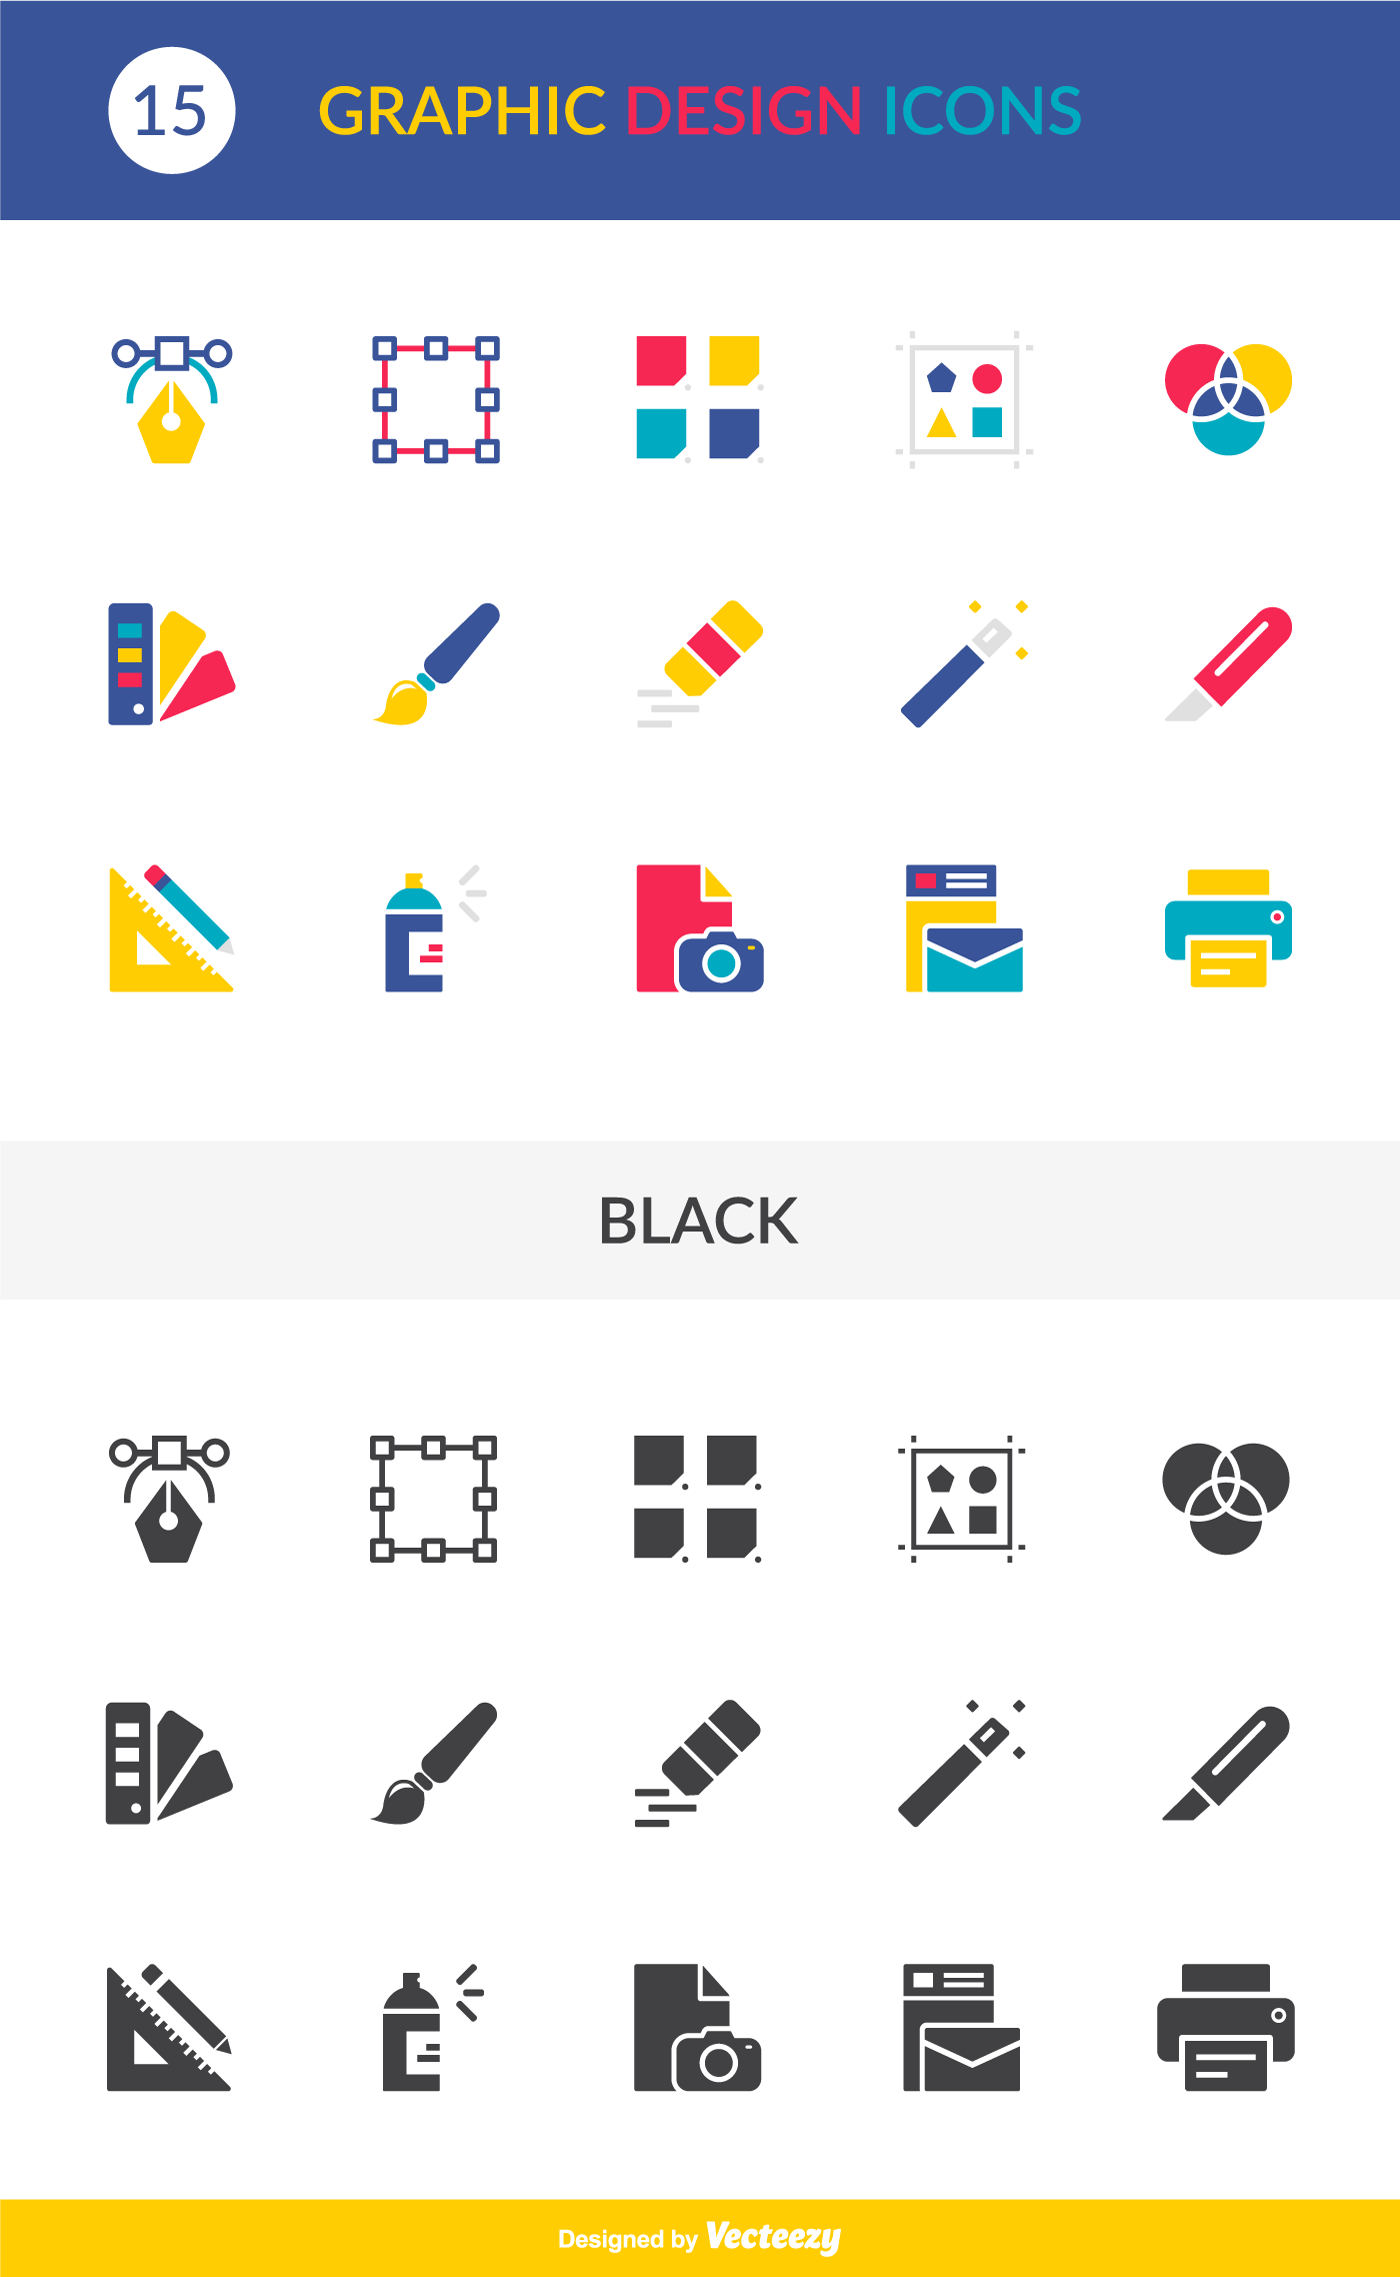 Free Graphic Design Icons EPS Vector Pack